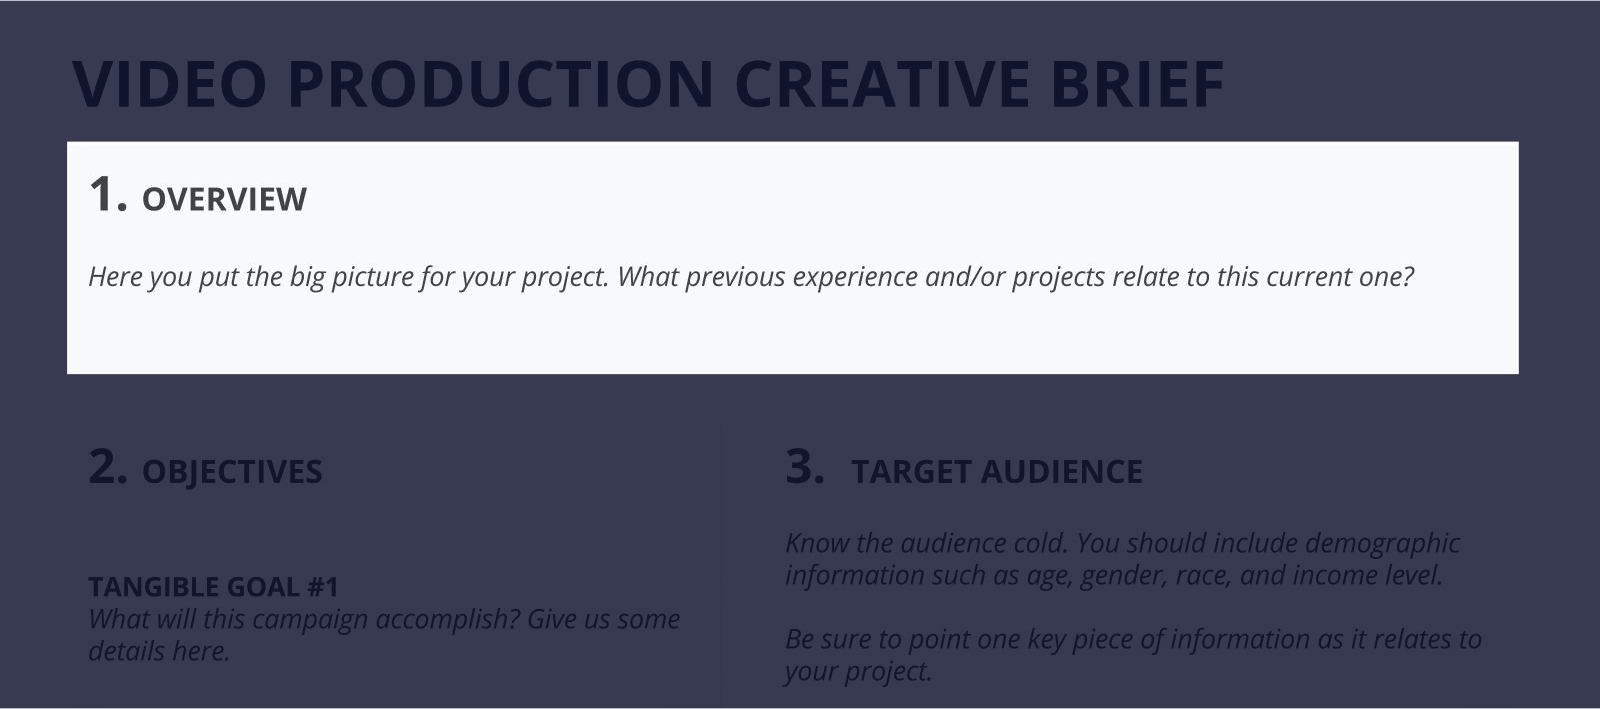 The Best Creative Brief Template For Video Agencies [Free Download] - Section 1 - Overview